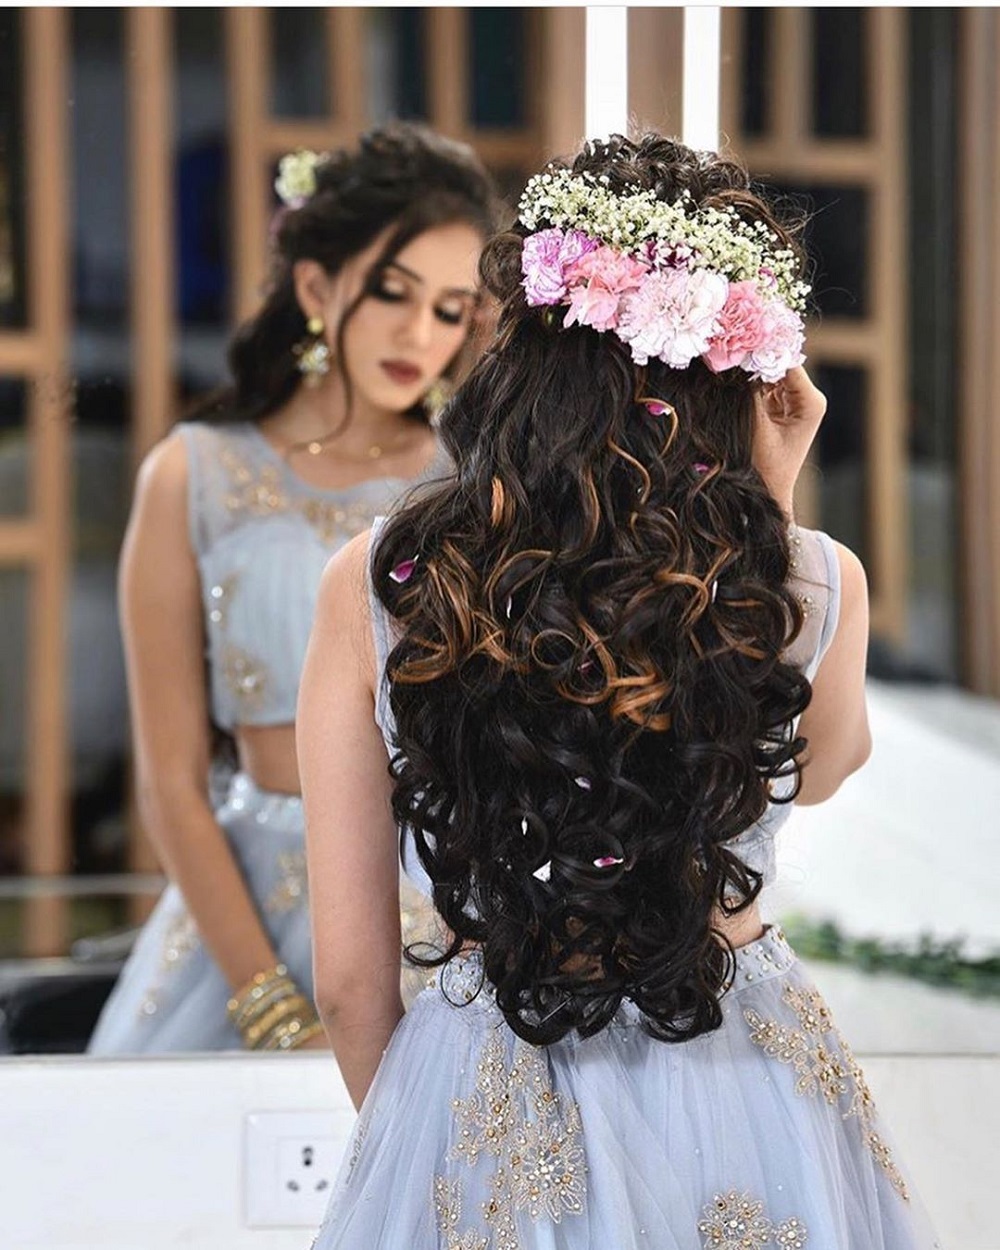 Bride Wearing Mermaid-Style Dress and Half-Up Hairstyle